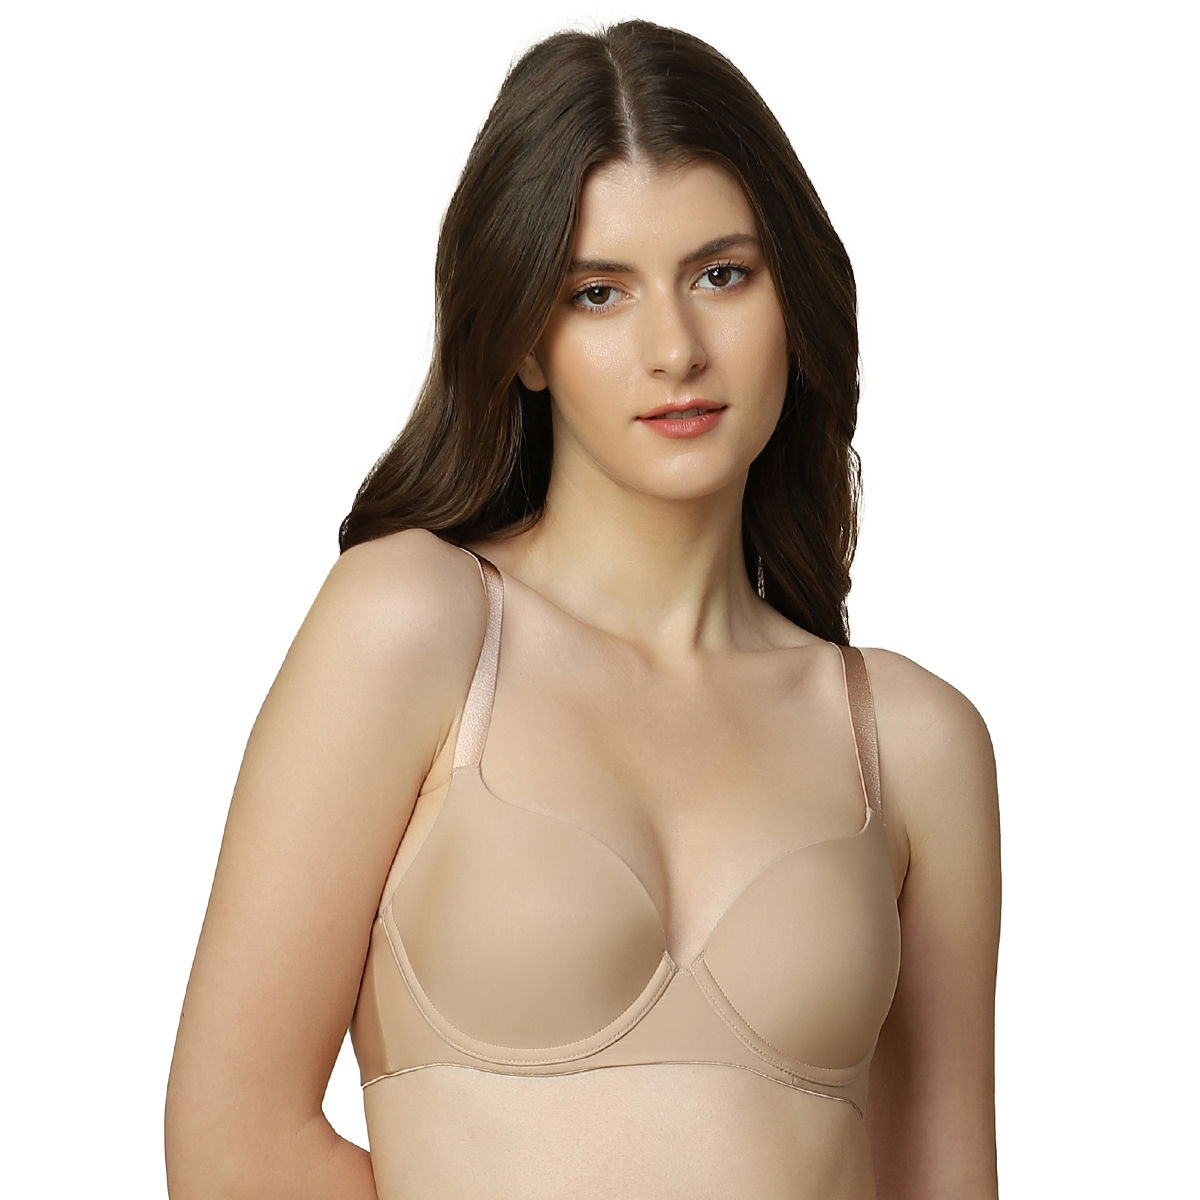 TRIUMPH Triumph T-Shirt Bra 60 Invisible Wired Padded Body Make-Up Series  Light Weight Seamless Support Everyday Bra Women T-Shirt Lightly Padded Bra  - Buy TRIUMPH Triumph T-Shirt Bra 60 Invisible Wired Padded